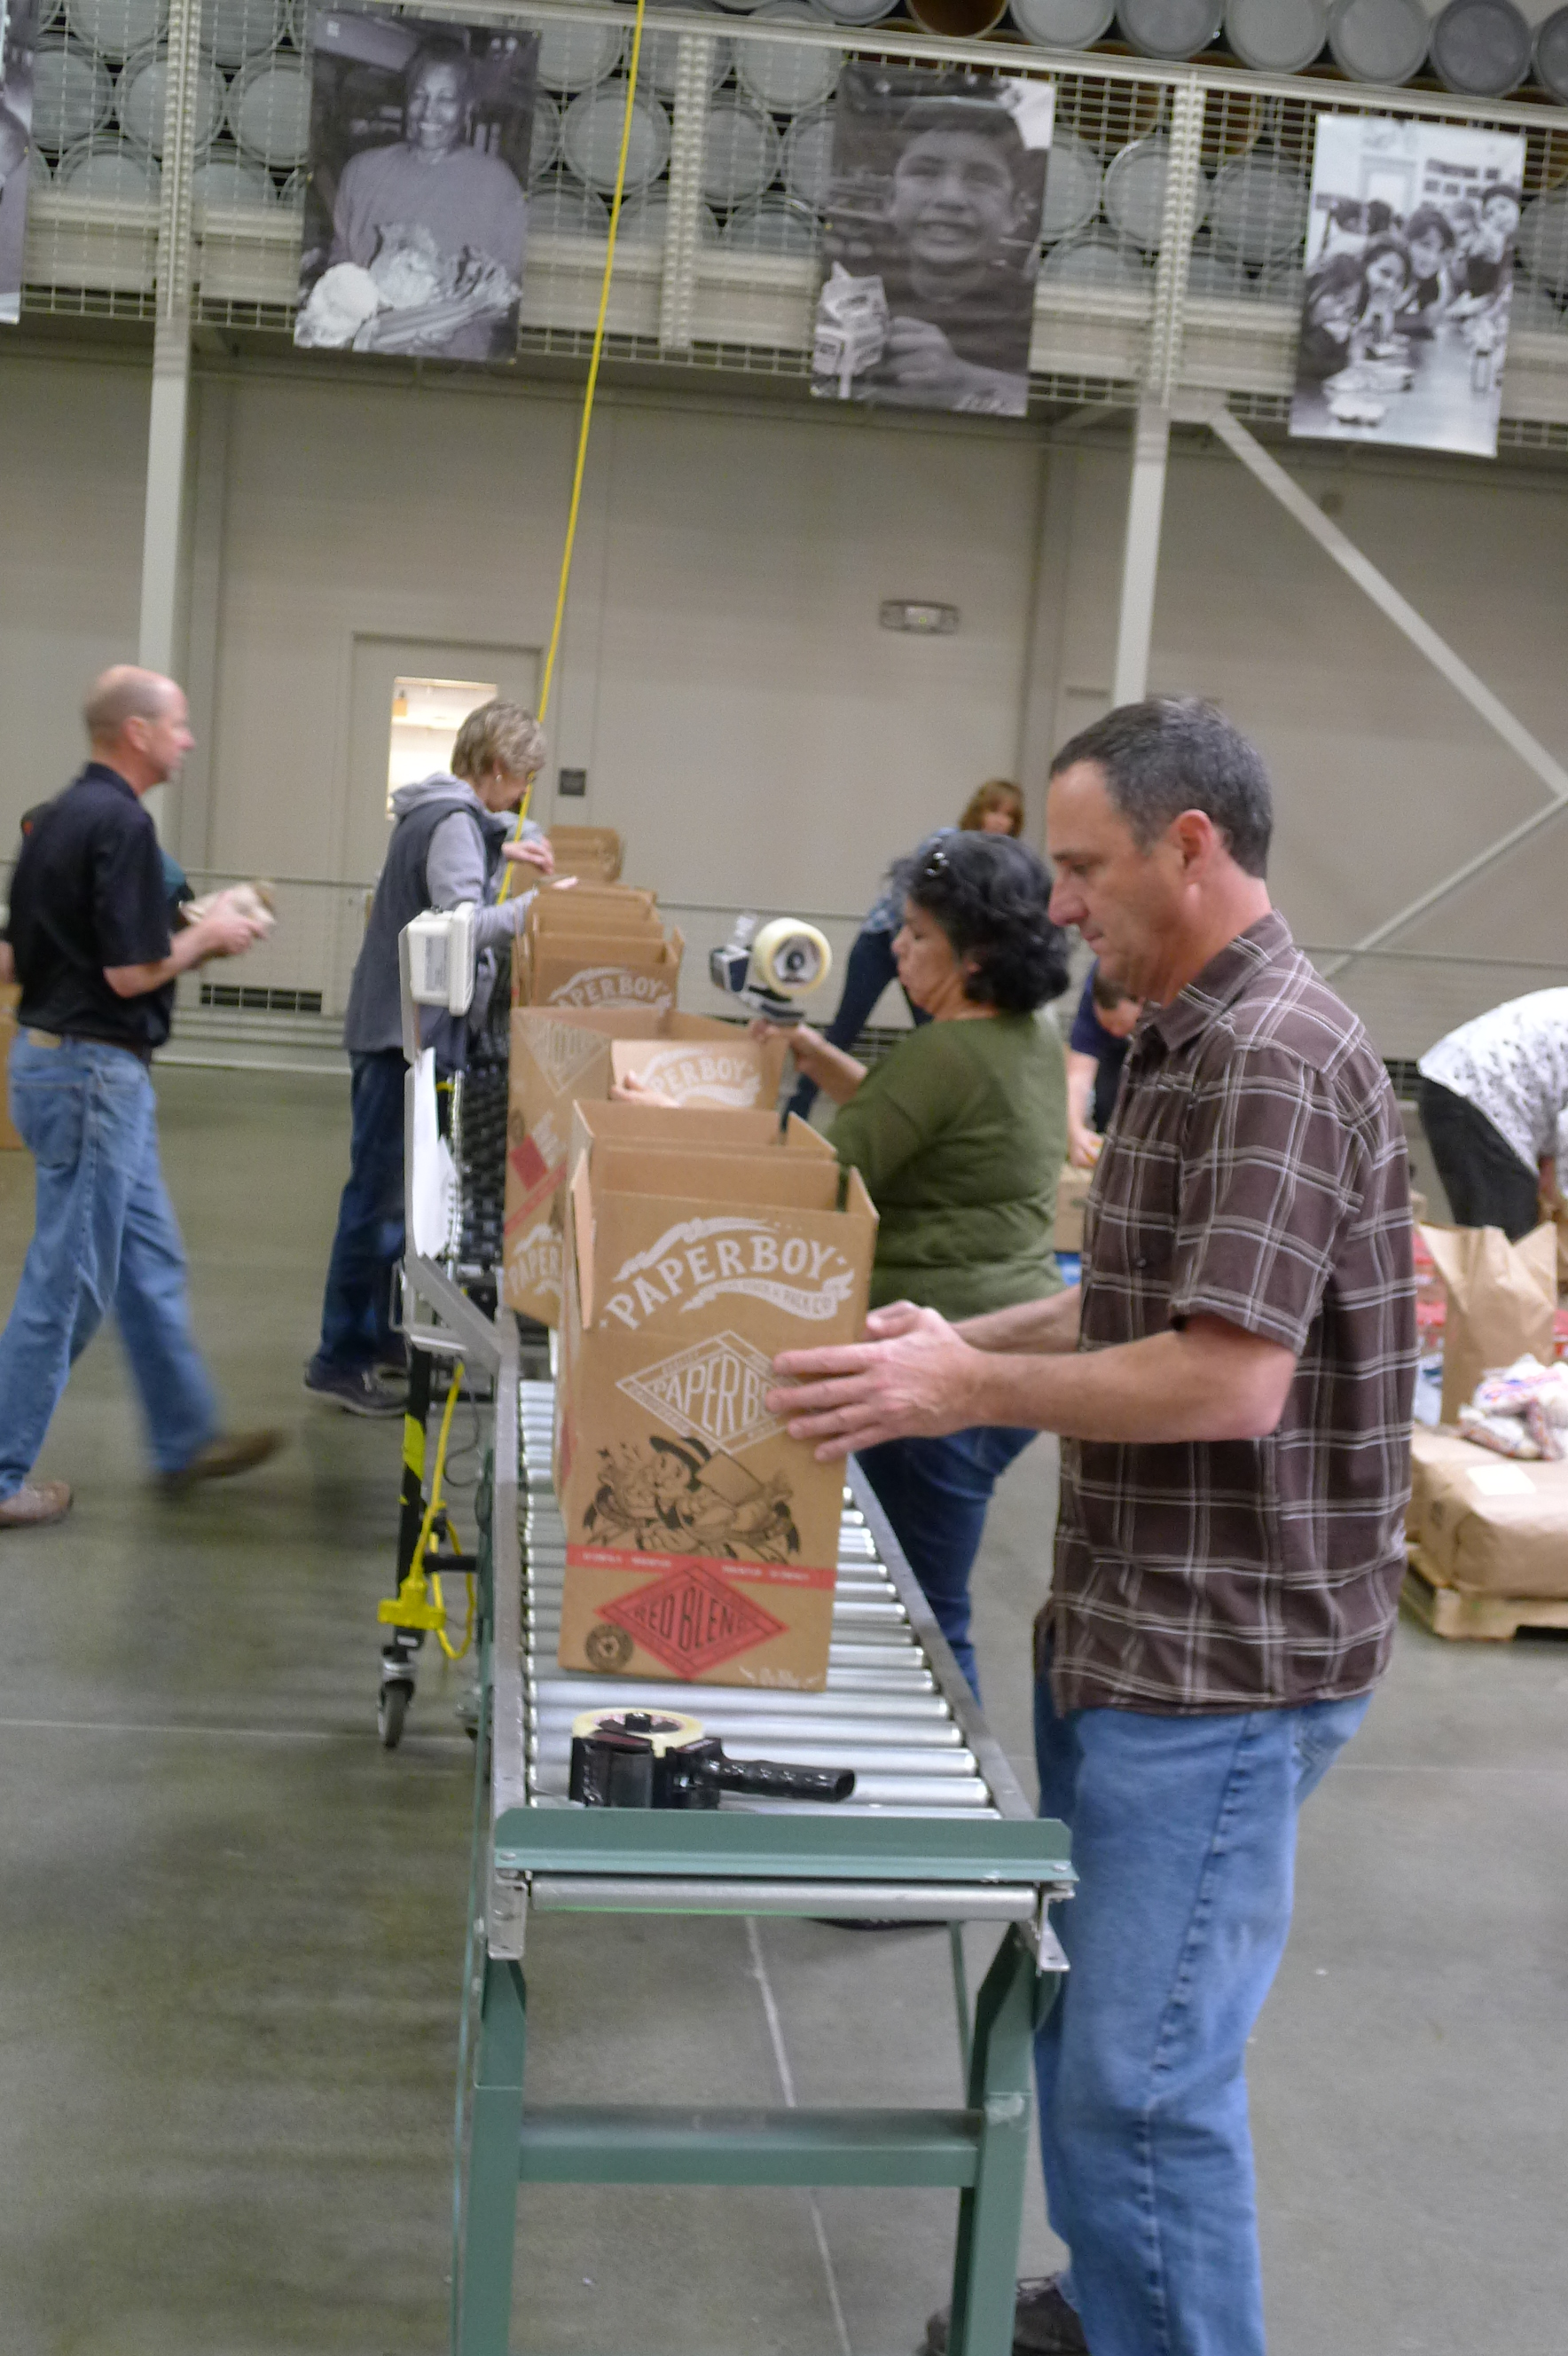 redwood empire food bank, tlcd architecture, volunteering, food donation, sonoma county